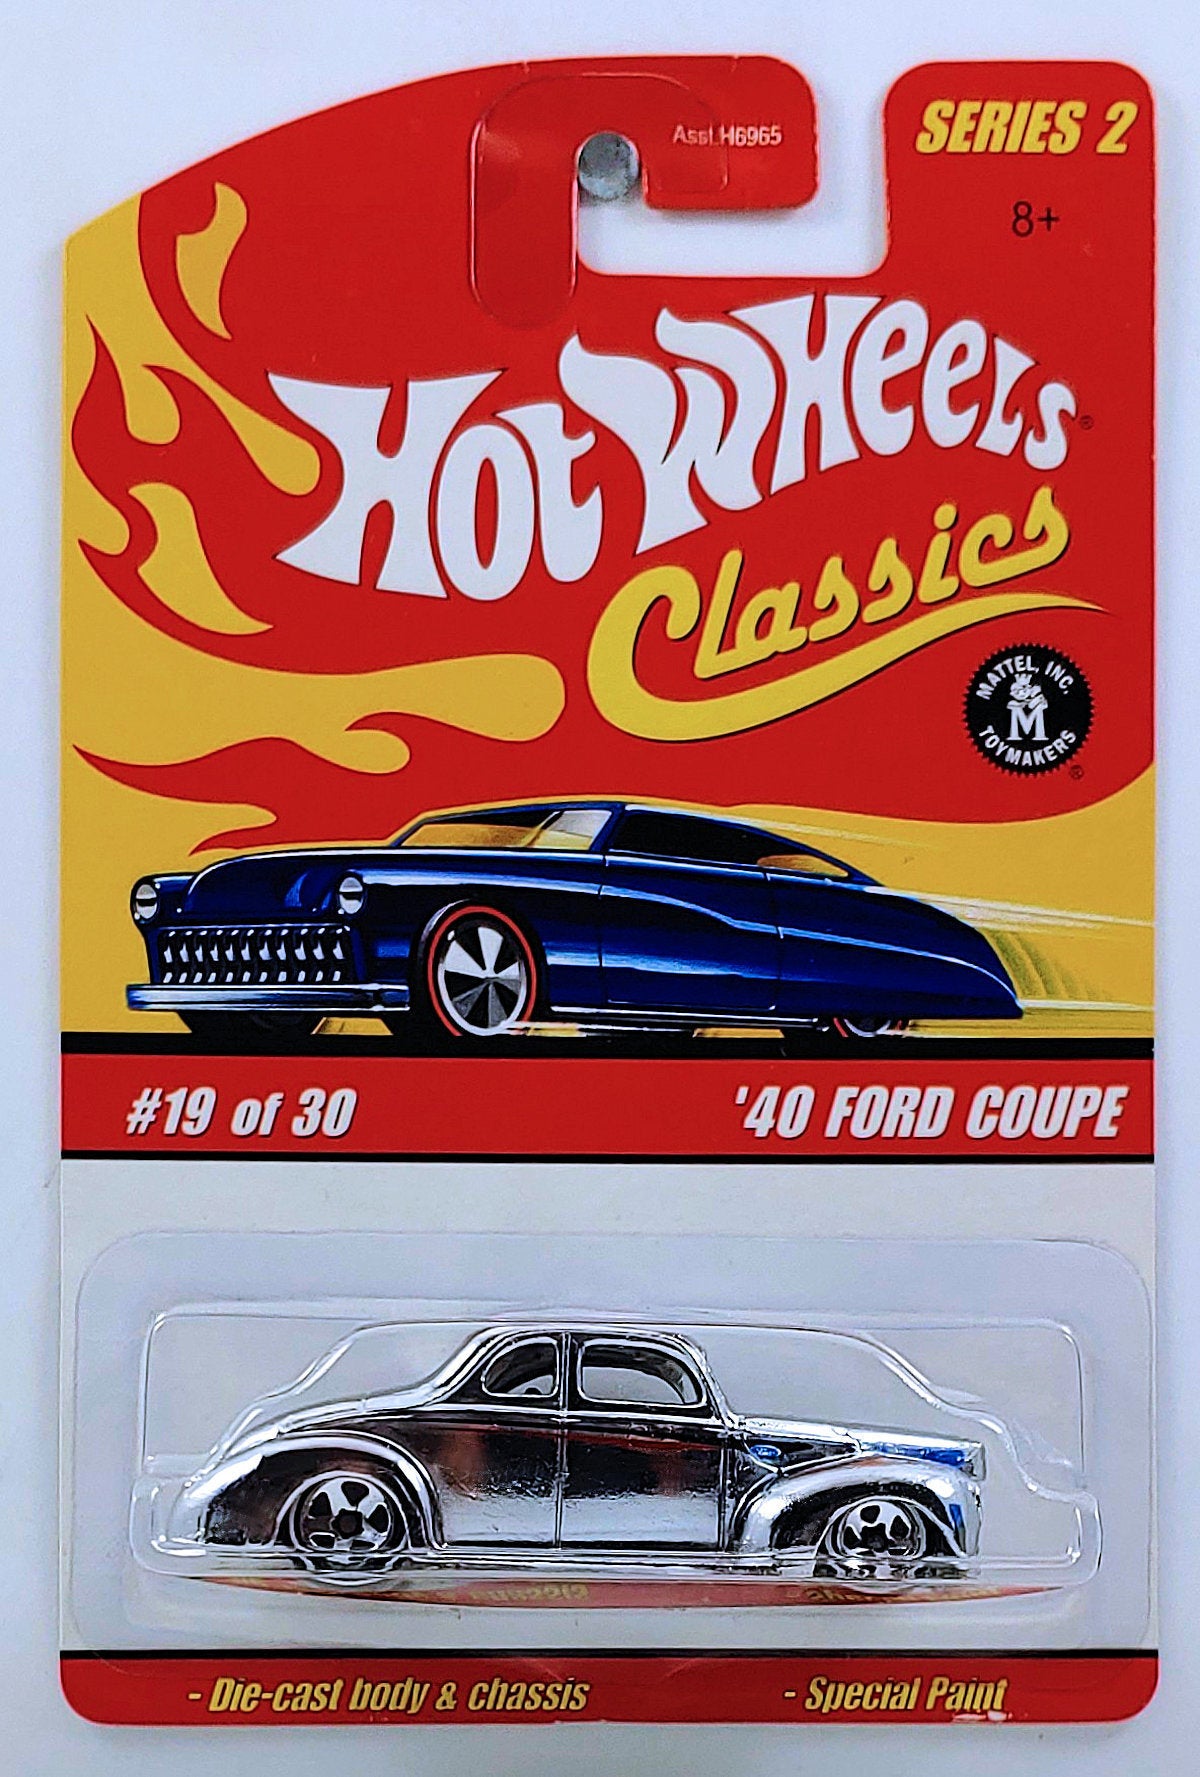 Hot Wheels 2006 - Classics Series 2 # 19/30 - '40 Ford Coupe - Chrome - 5 Spokes with White Walls - Metal/Metal